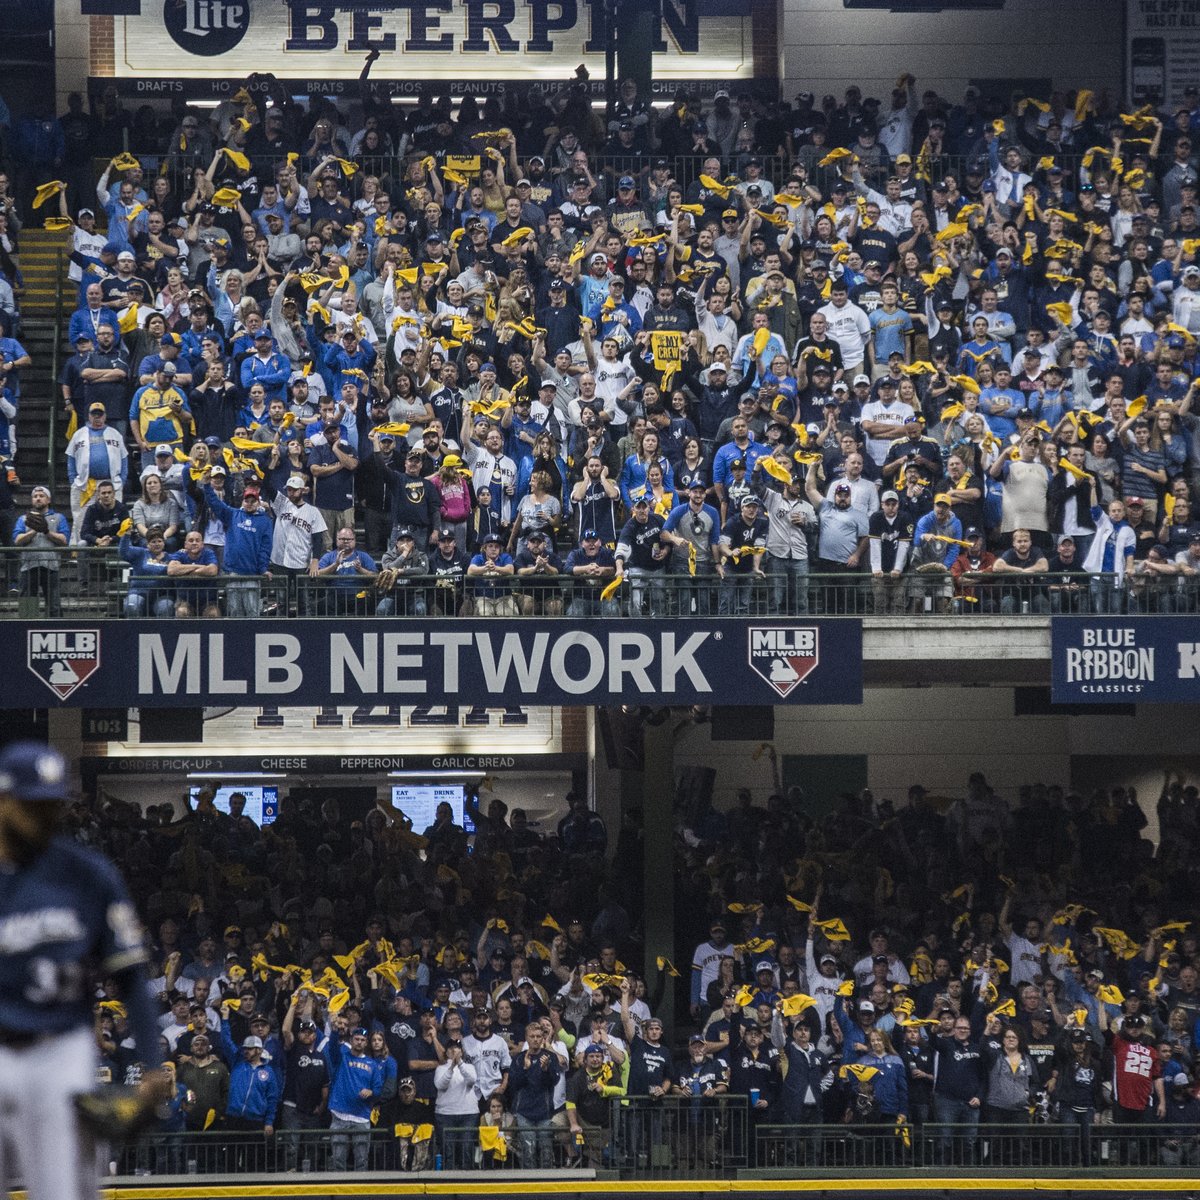 Check out some of the Brewers' top moments from 2018 